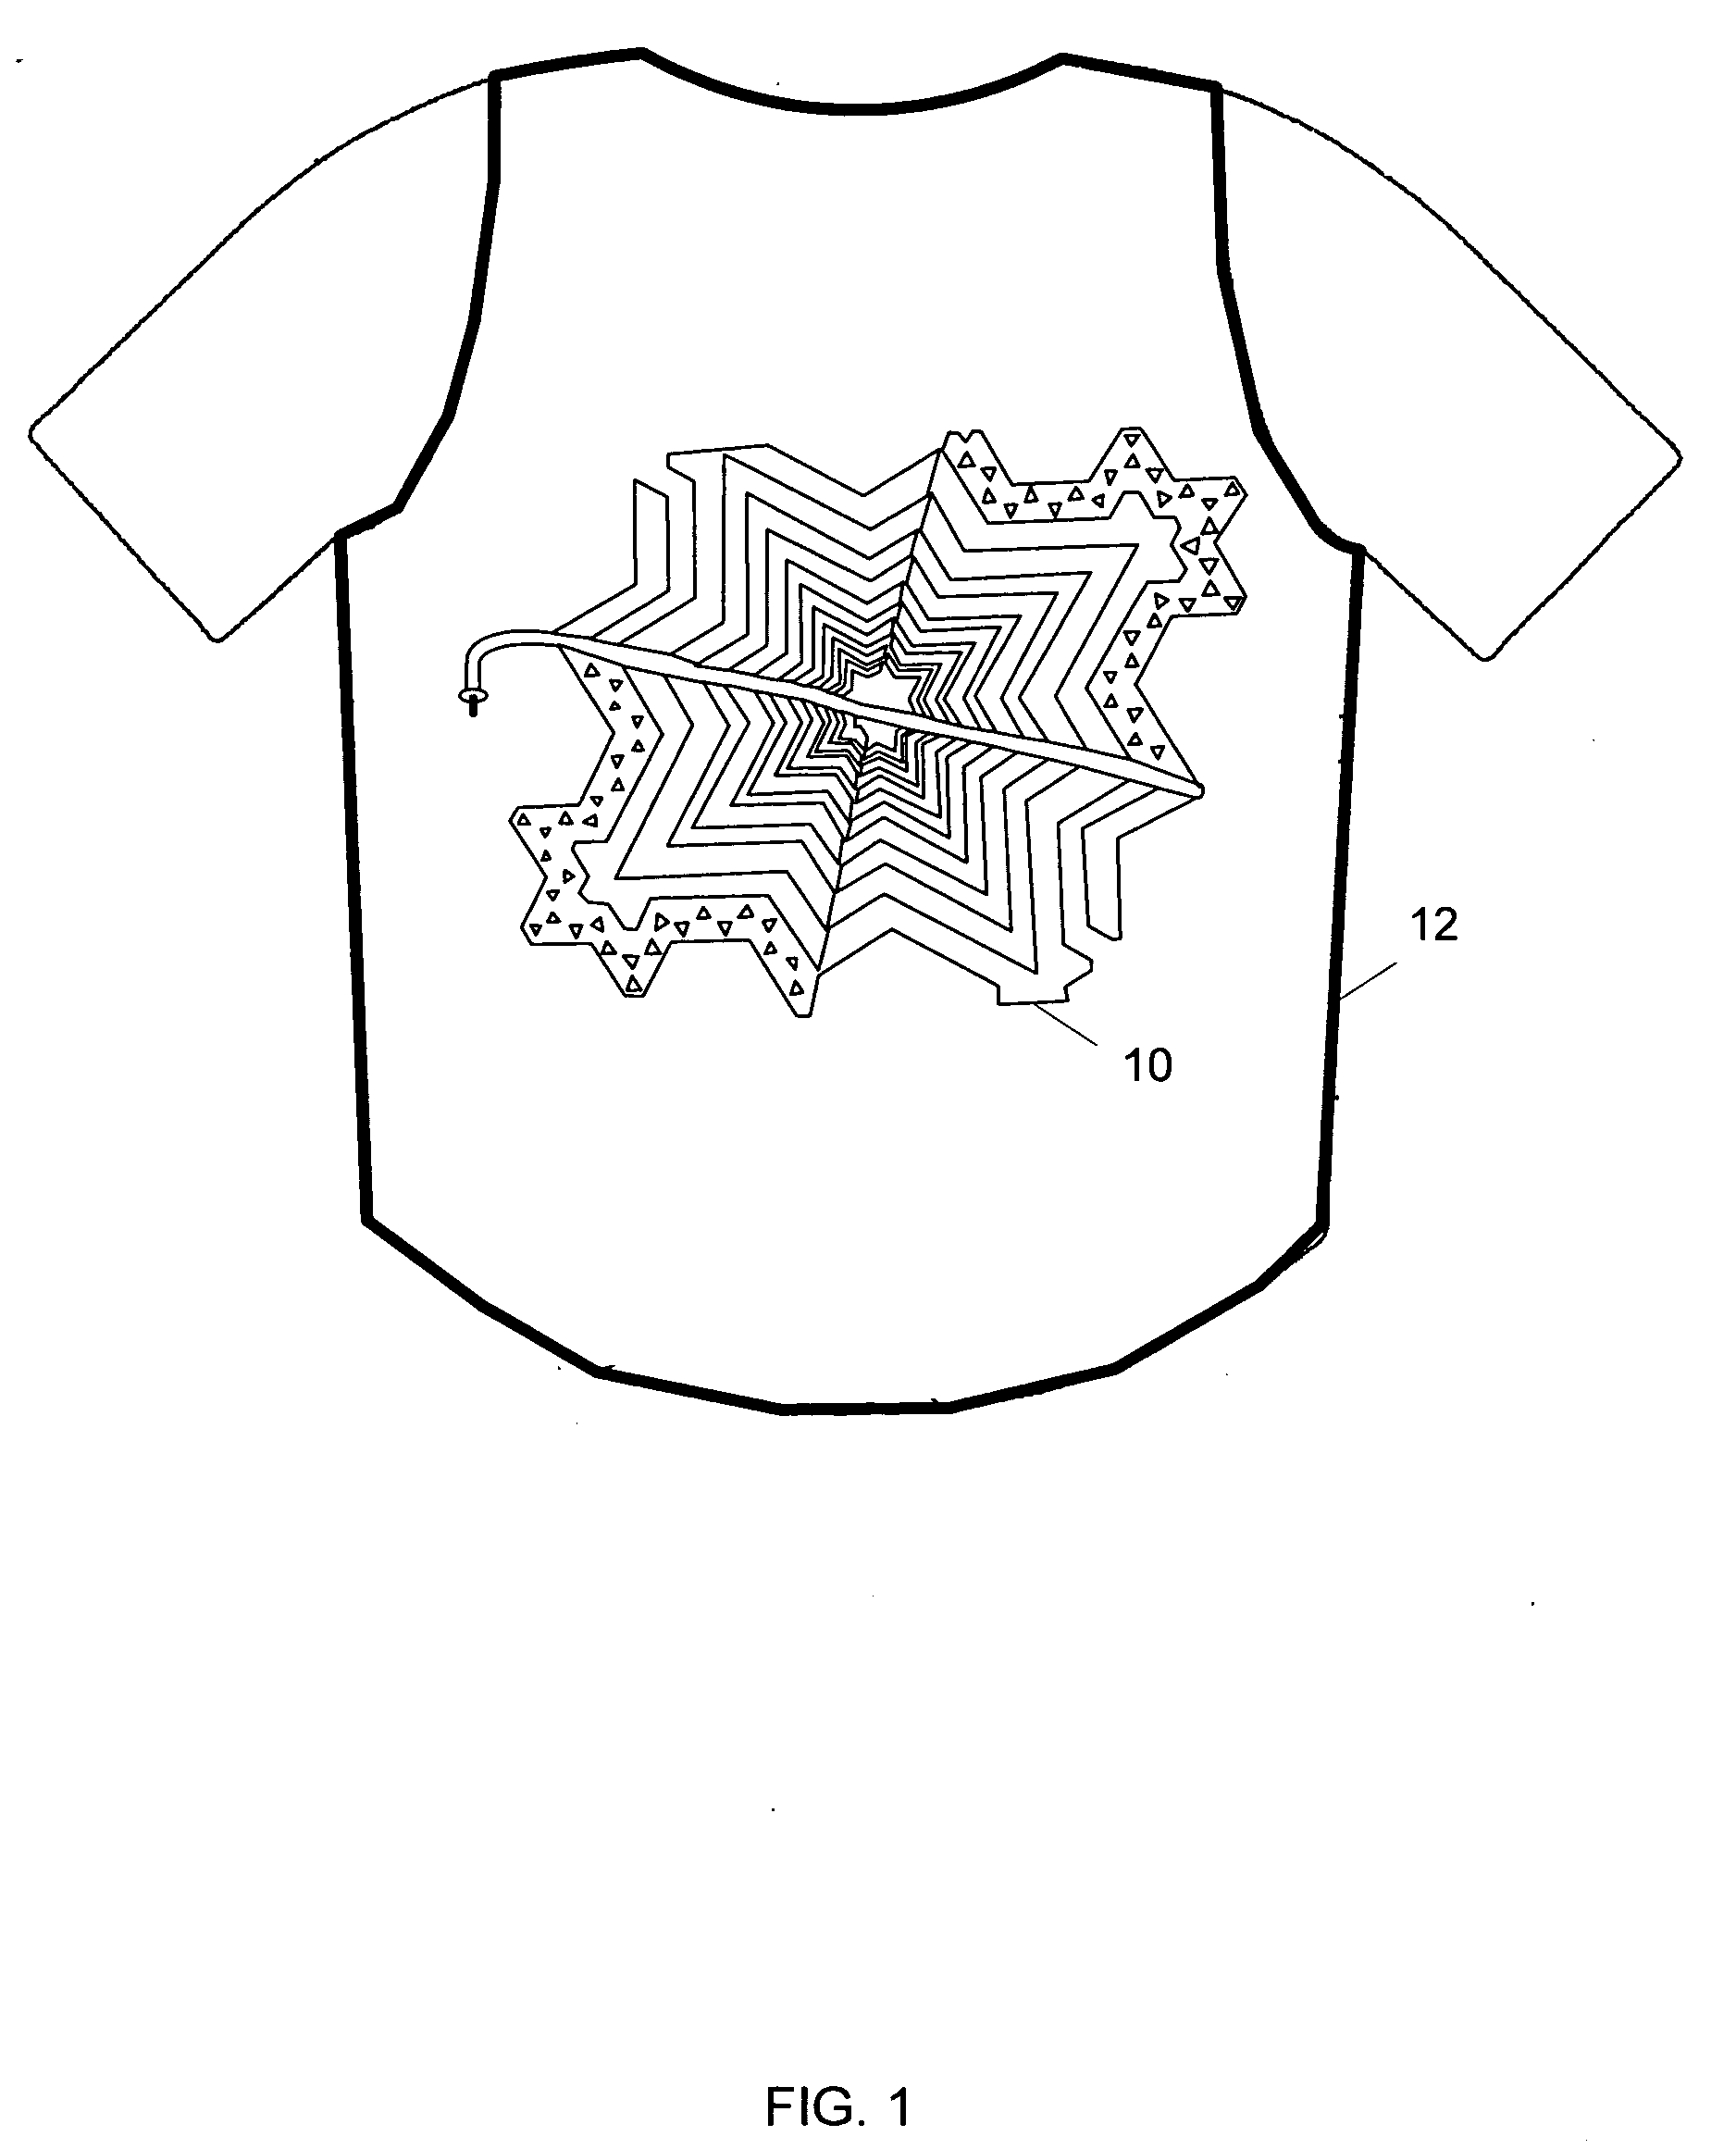 Wideband antenna system for garments